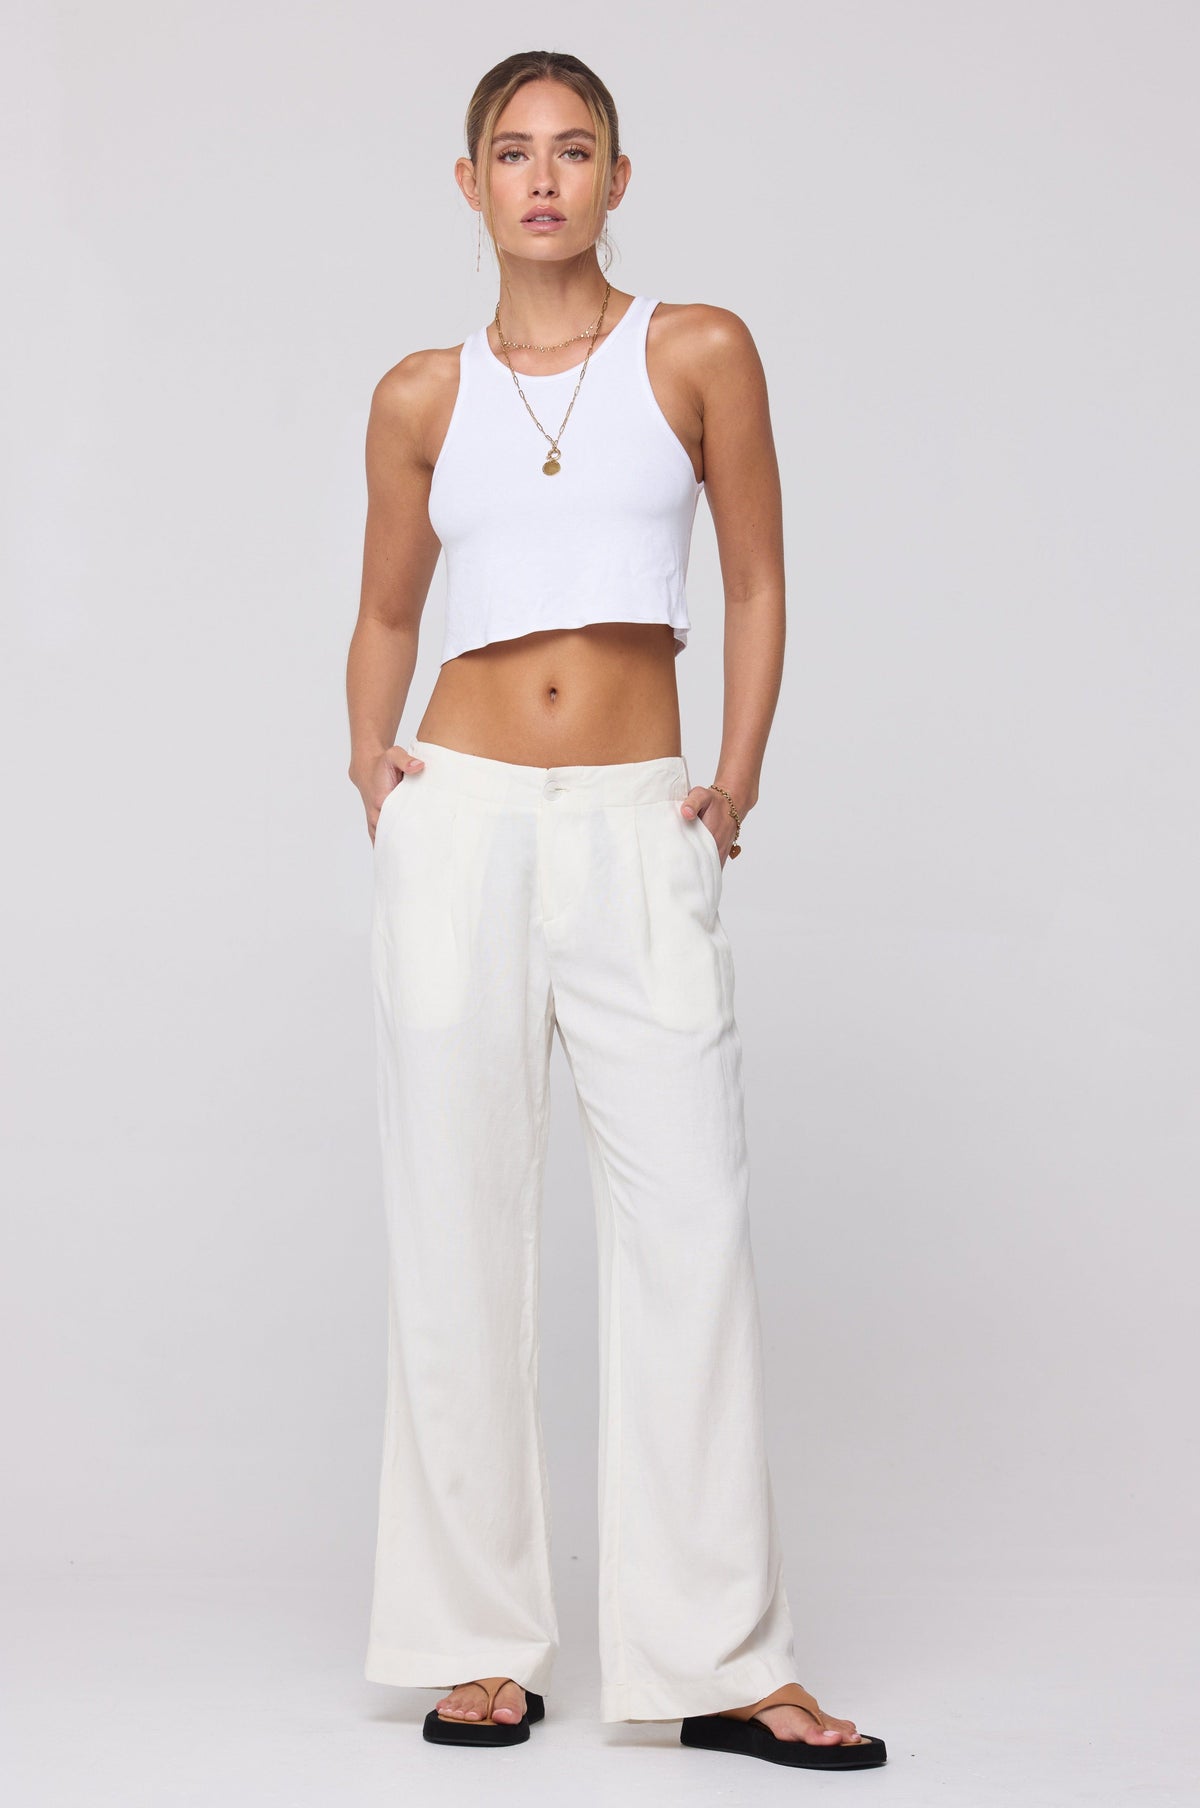 This is an image of Malcolm Trousers in White Linen - RESA featuring a model wearing the dress